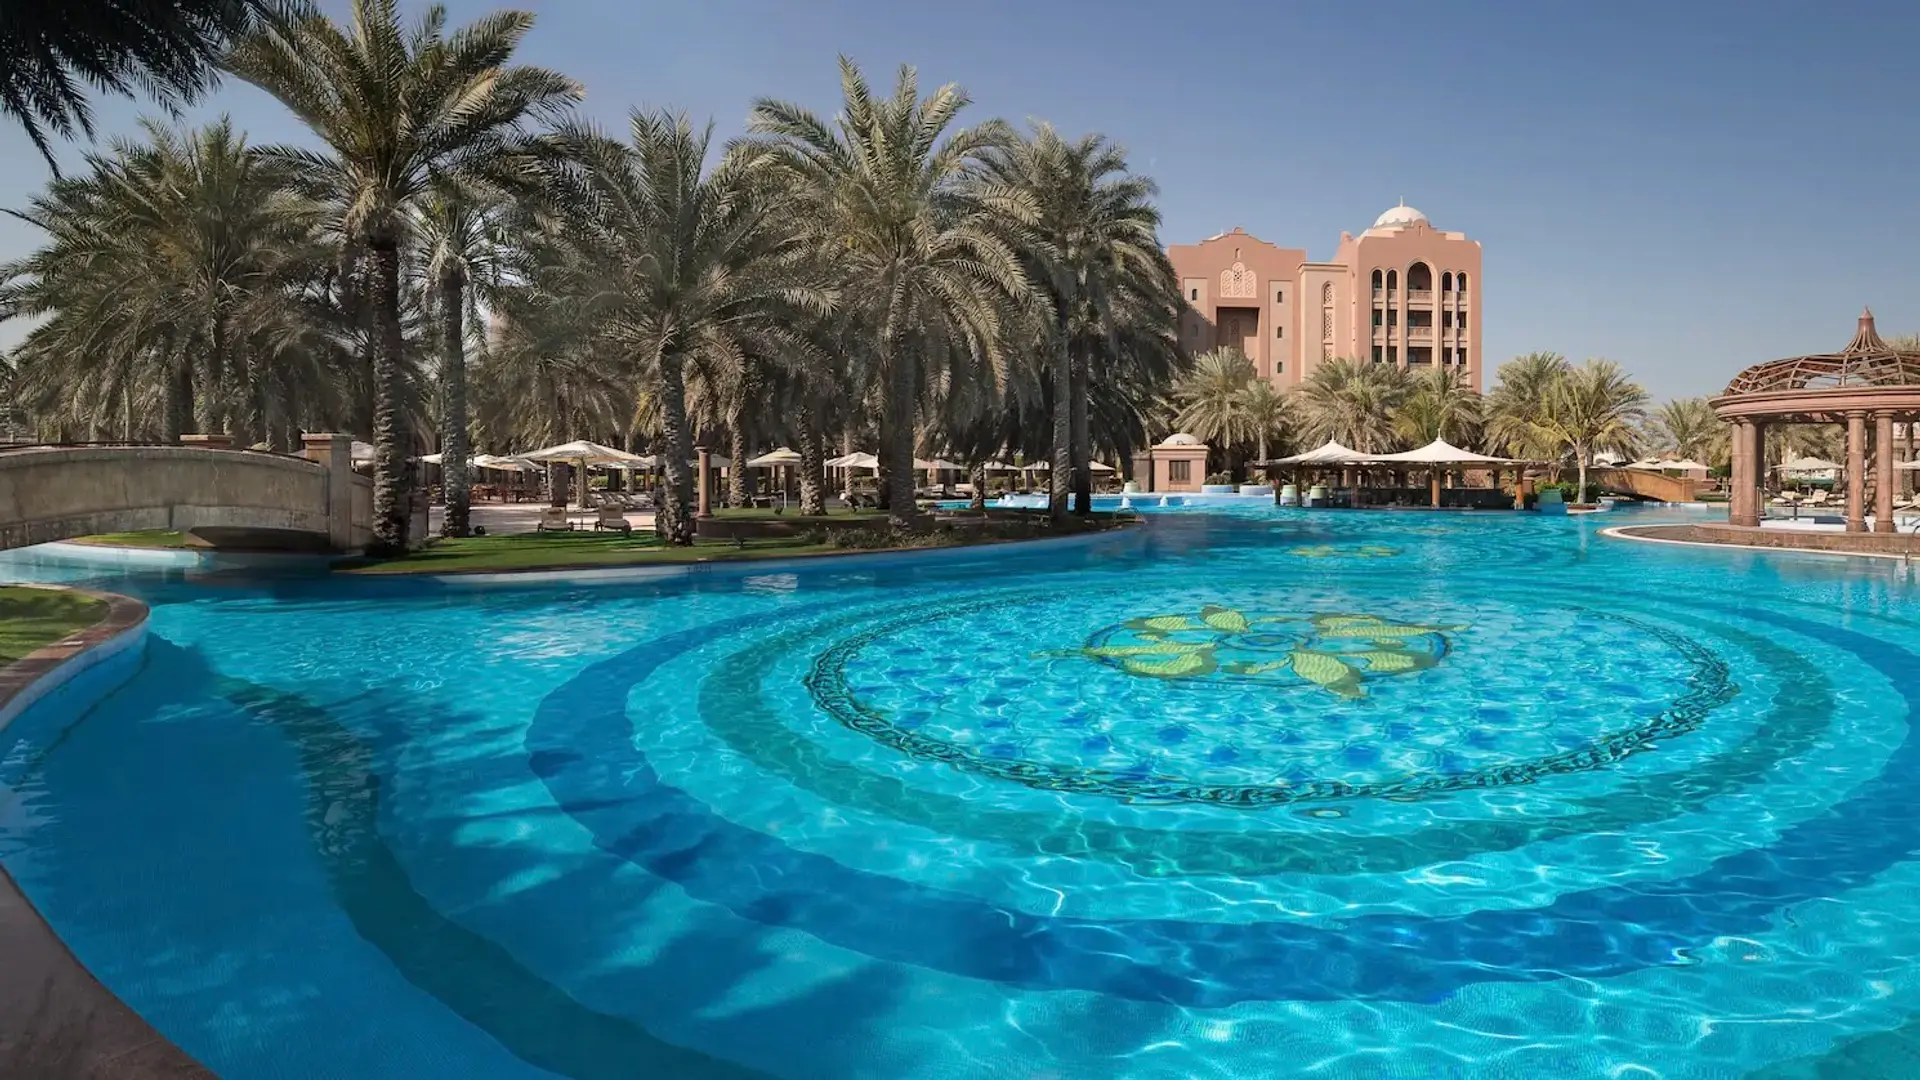 Hotel review Service & Facilities' - Emirates Palace Hotel - 0